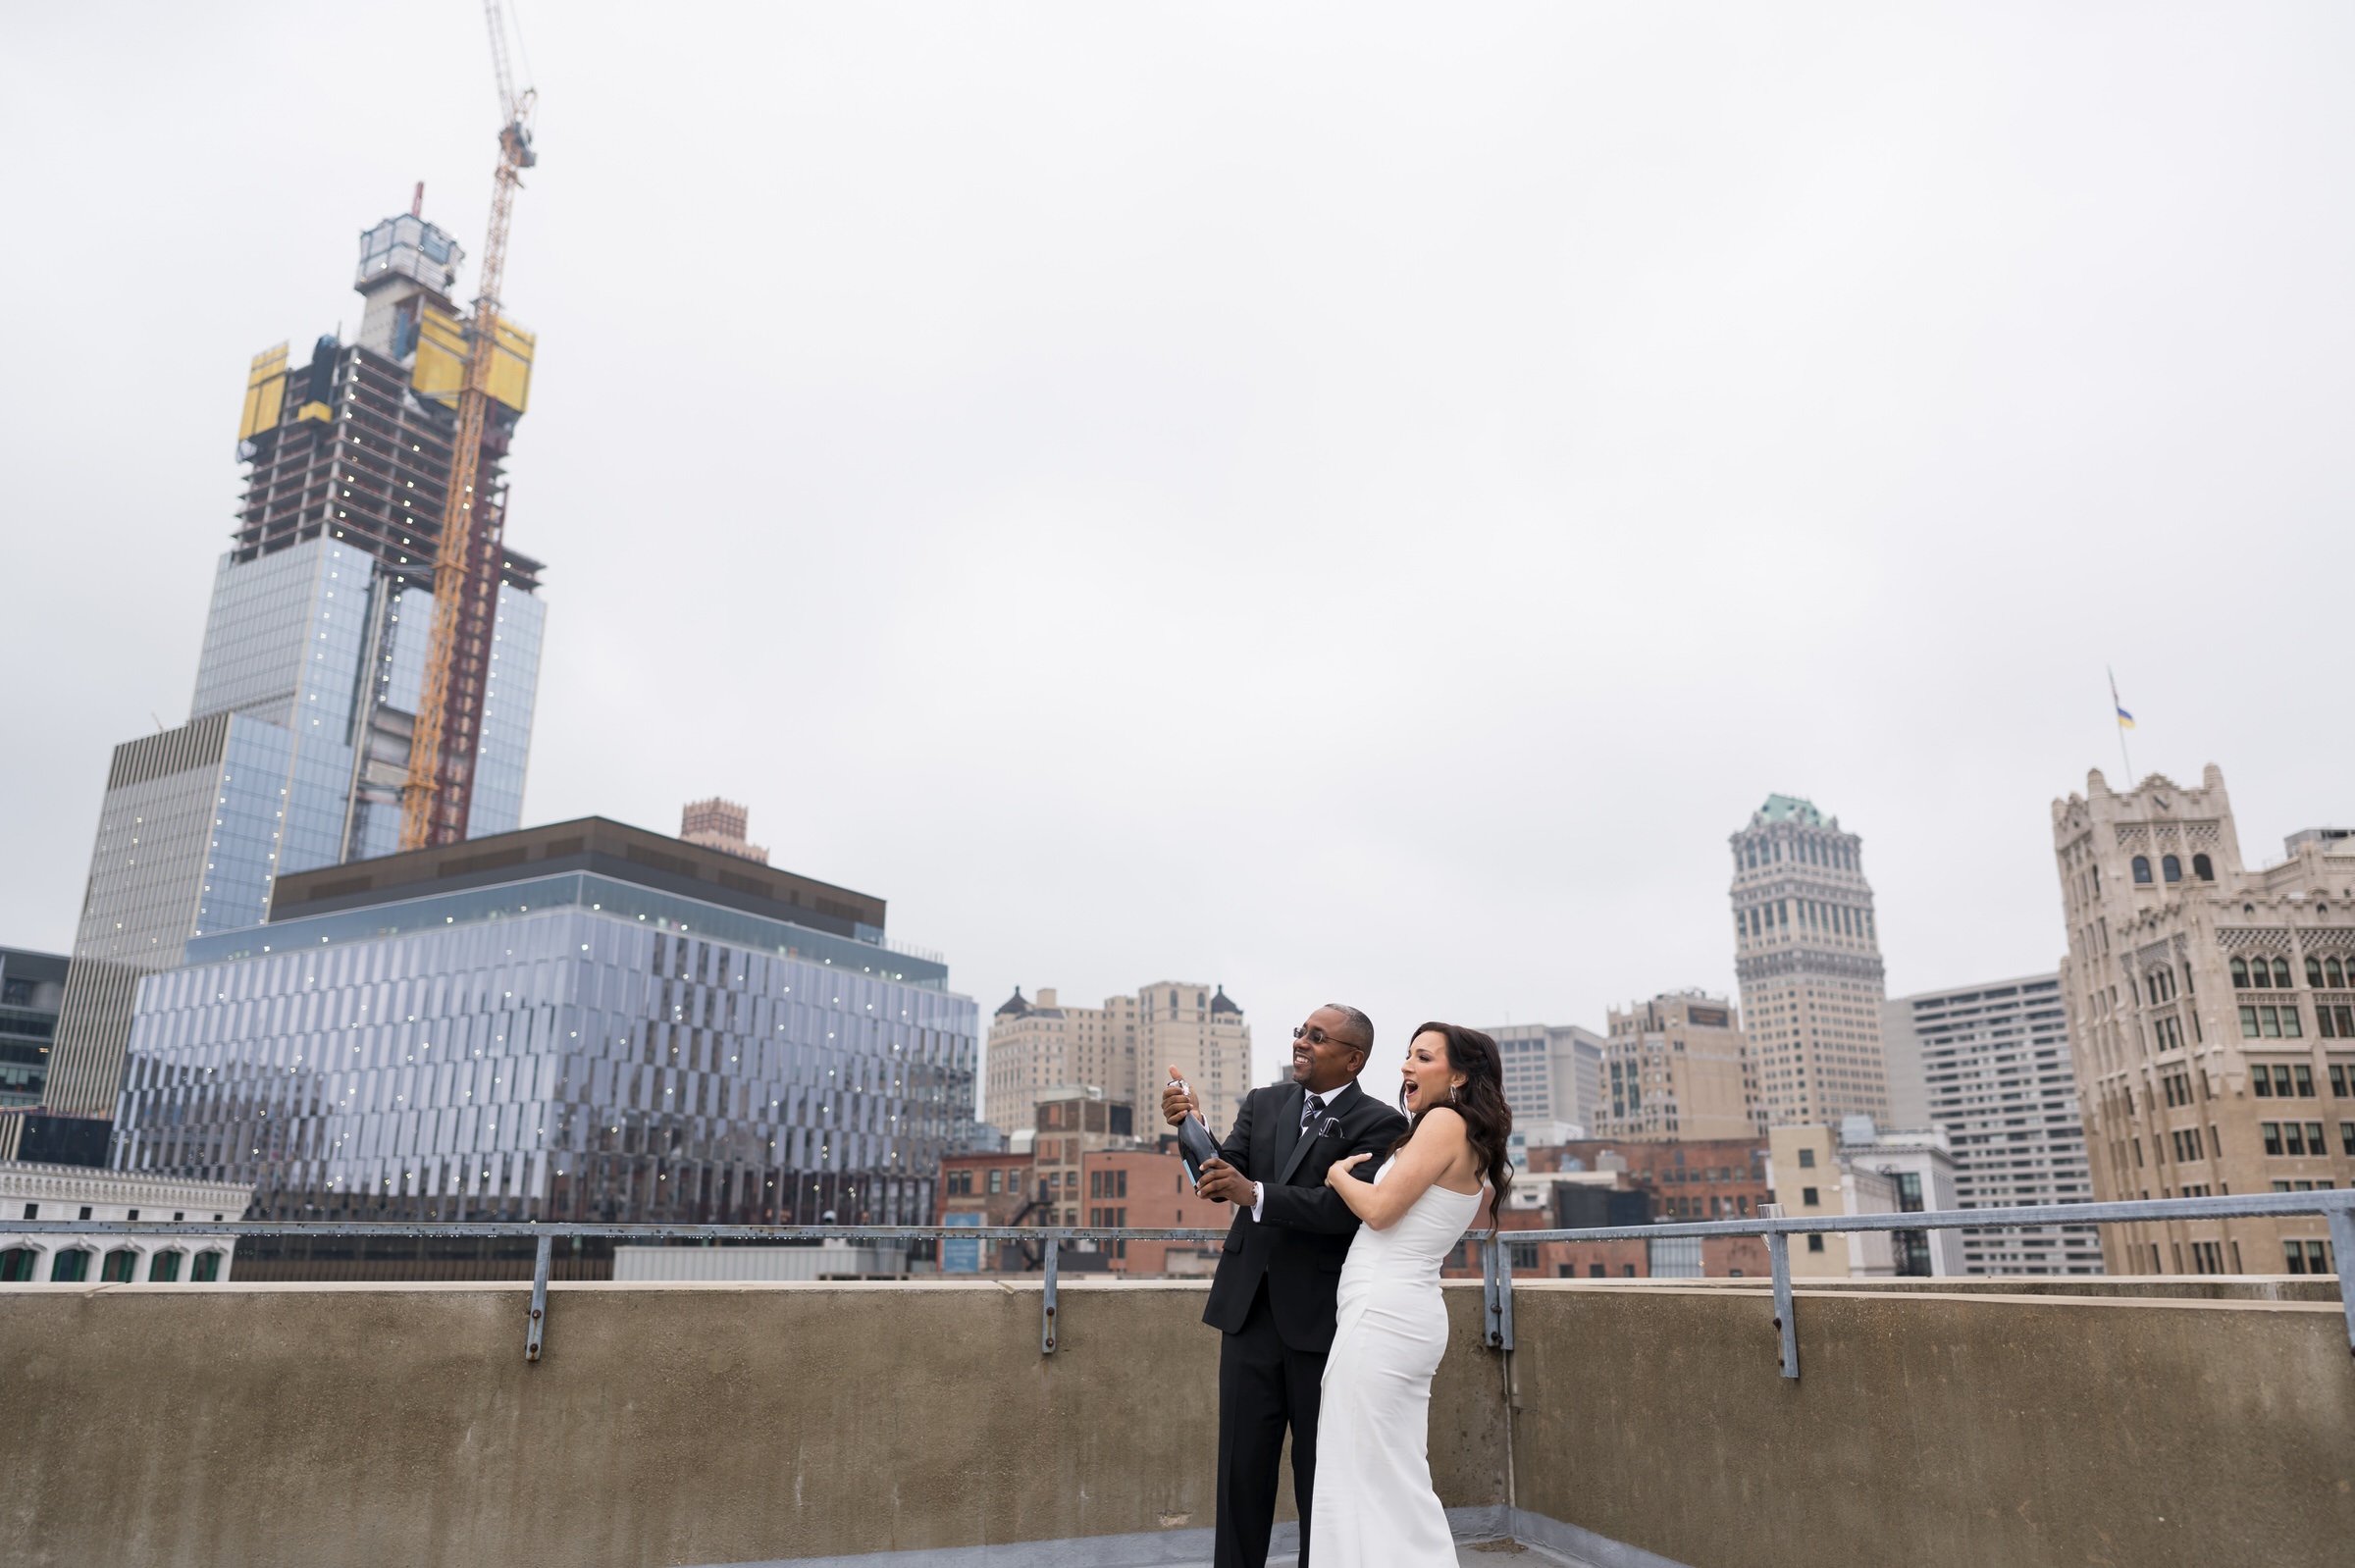 A bride and groom pop champagne on the Detroit Opera House parking garage on their wedding day.